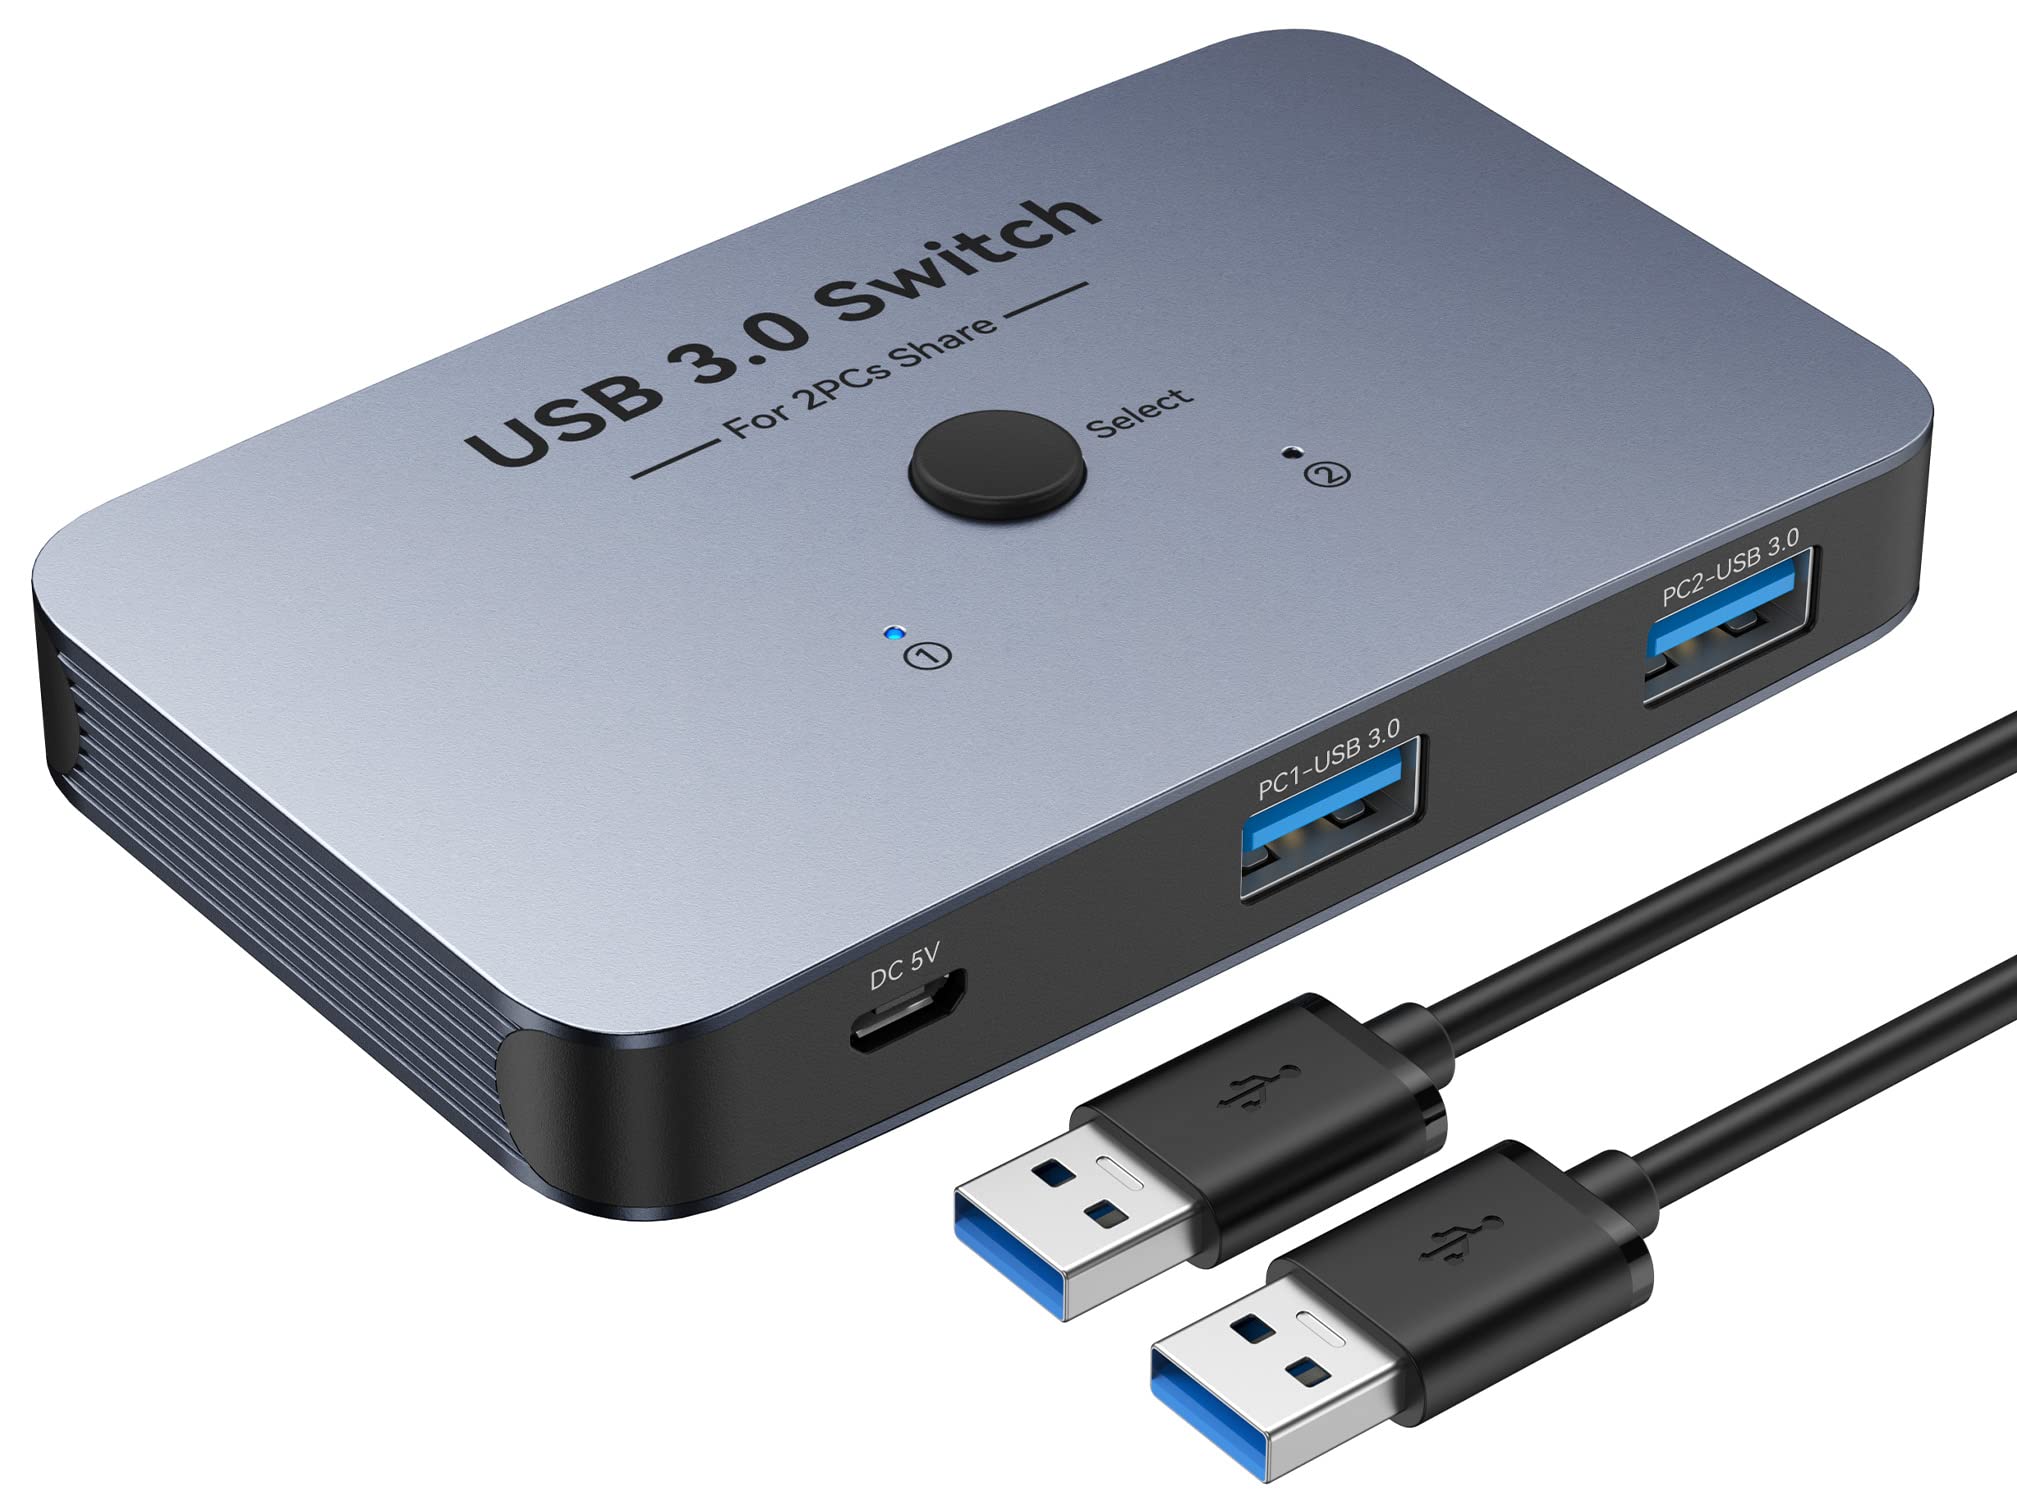 Unplug any external devices connected to the computer, such as printers, scanners, or external hard drives.
Remove any non-essential USB devices.